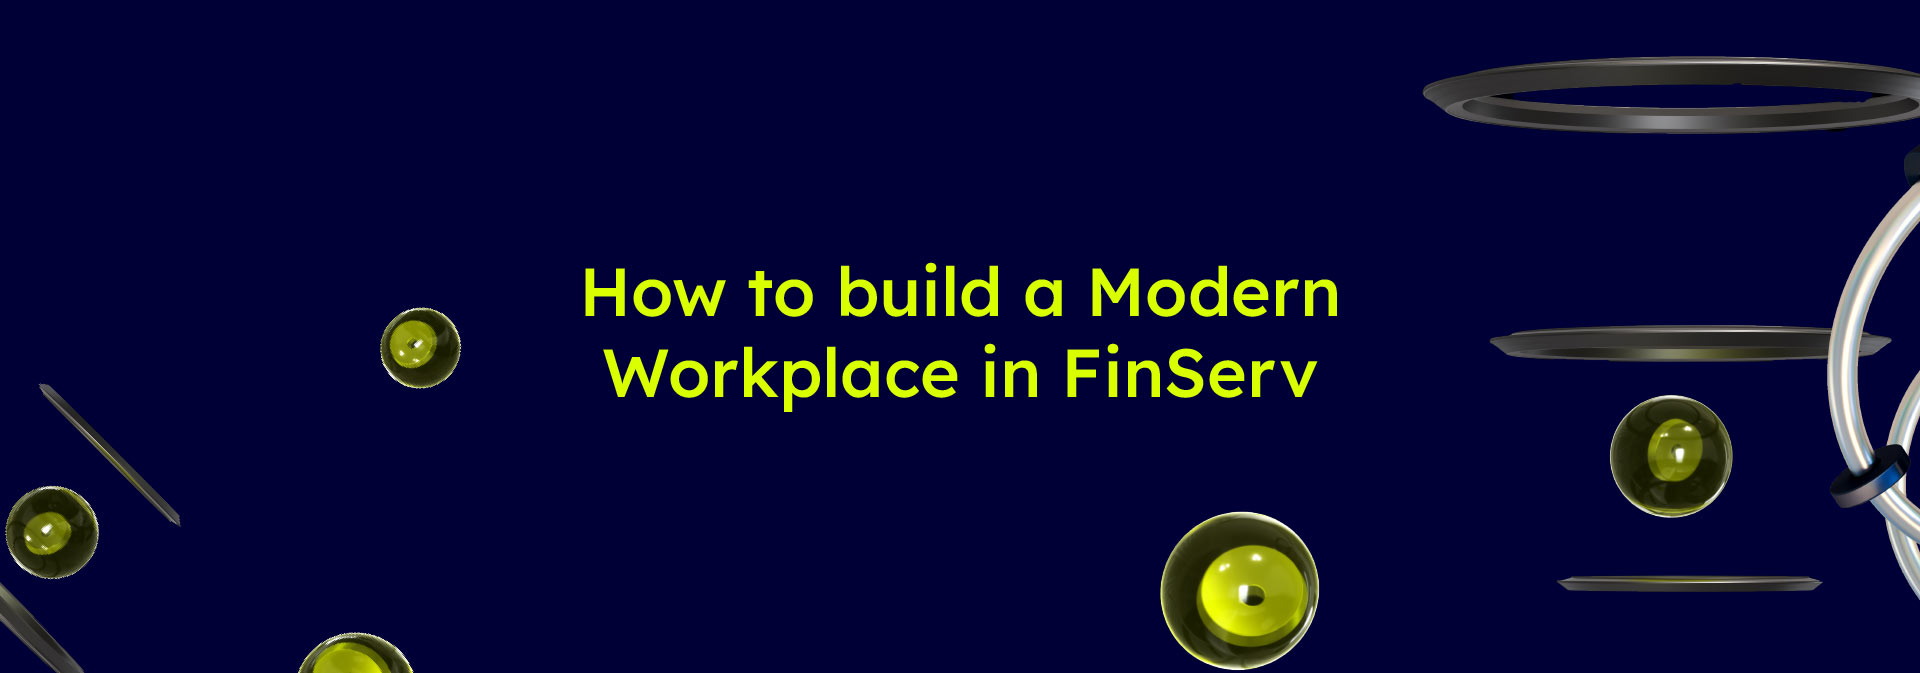 How to build a Modern Workplace in FinServ